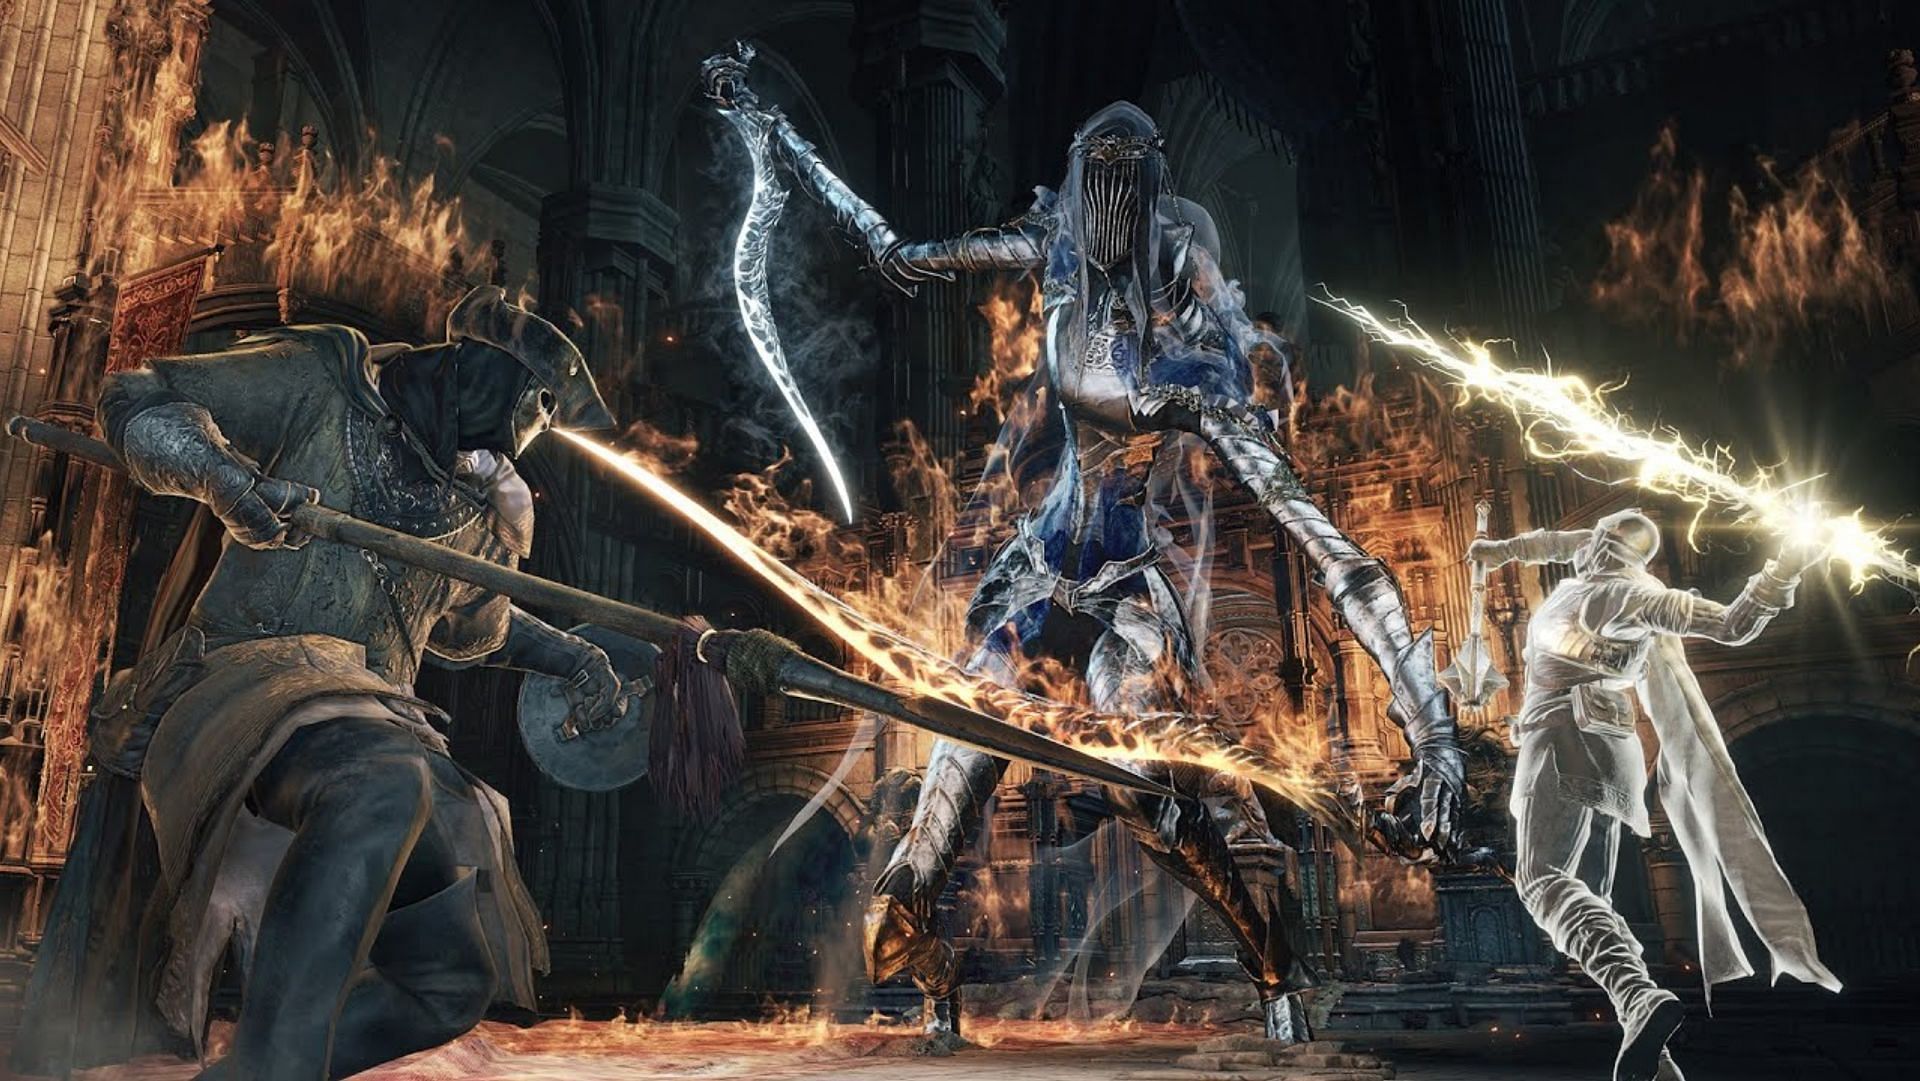 Hop on the game with your friends and take down foes (Image via FromSoftware)